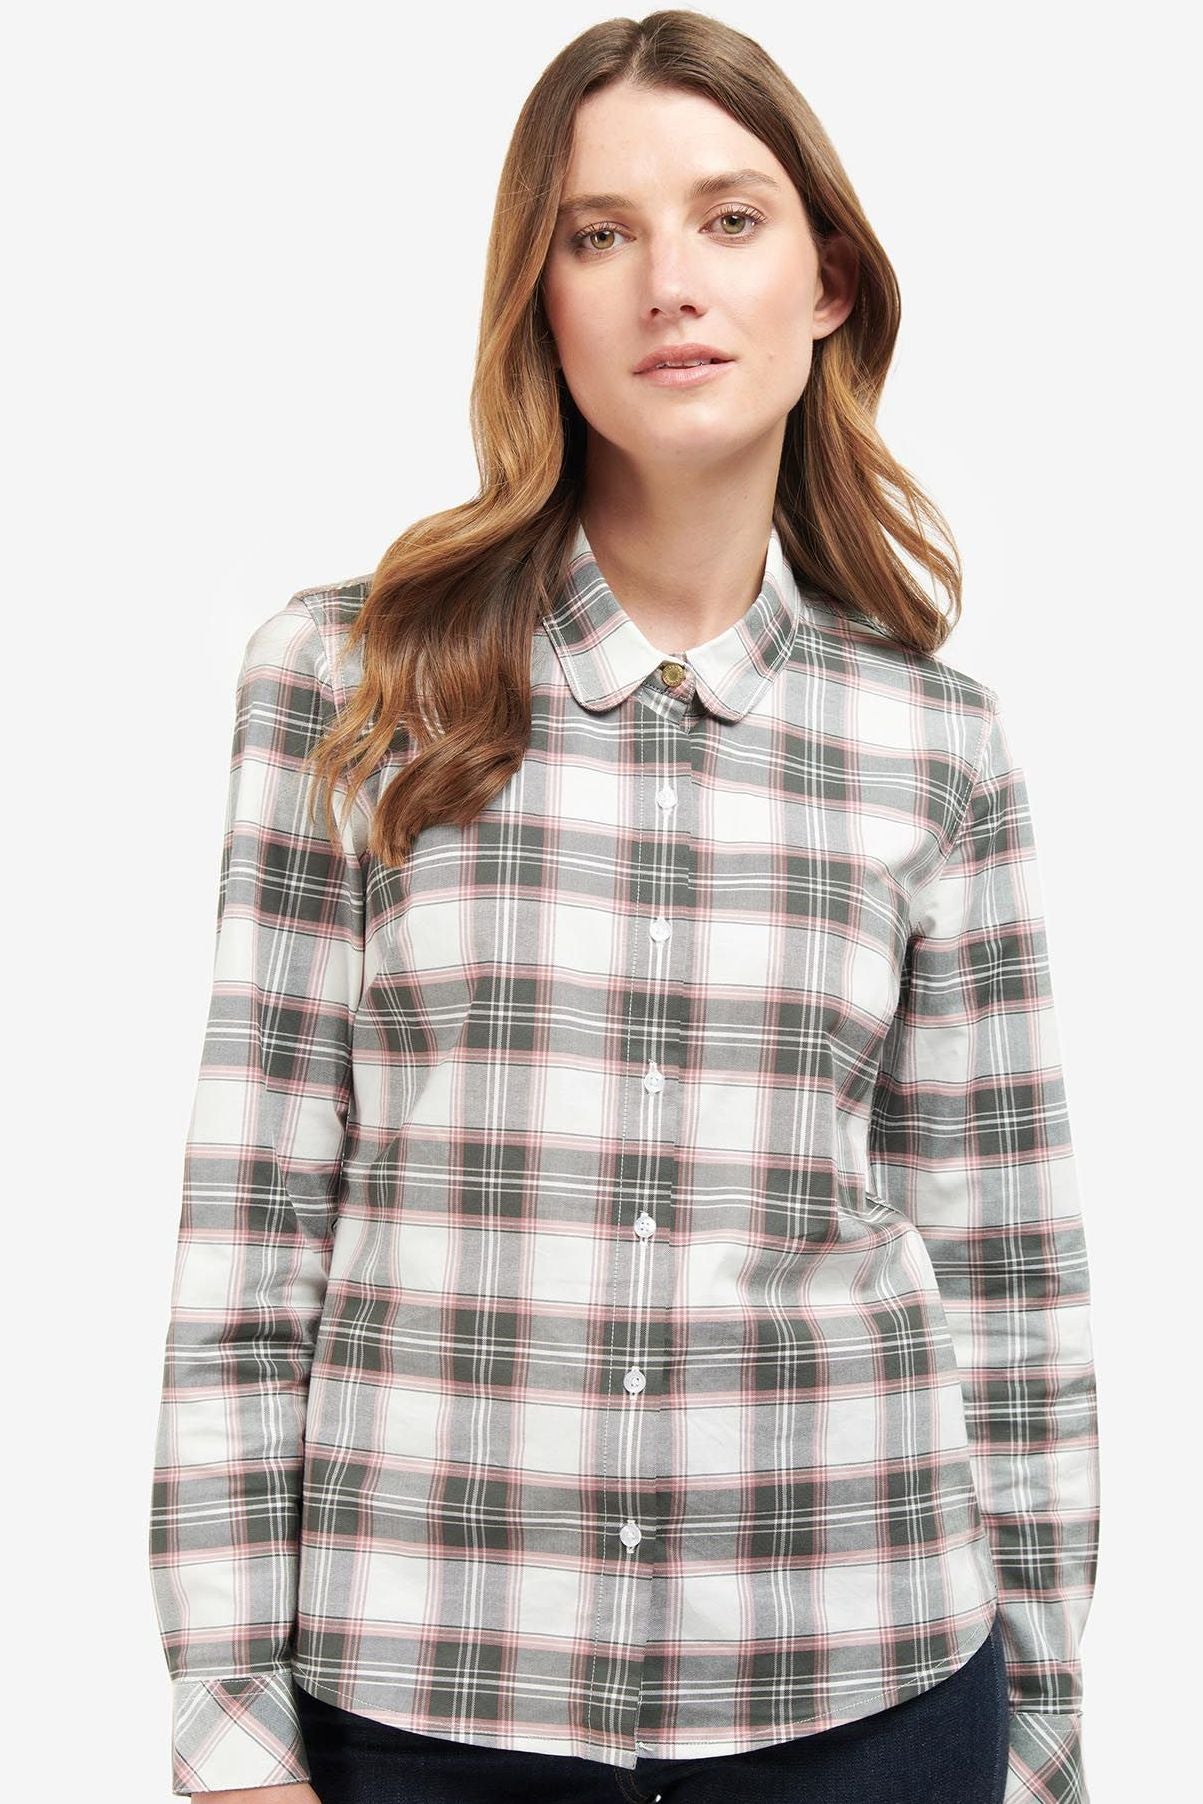 Barbour Ladies Shirt new Daphne in Cloud/Olive check LSH1540WH52 ...